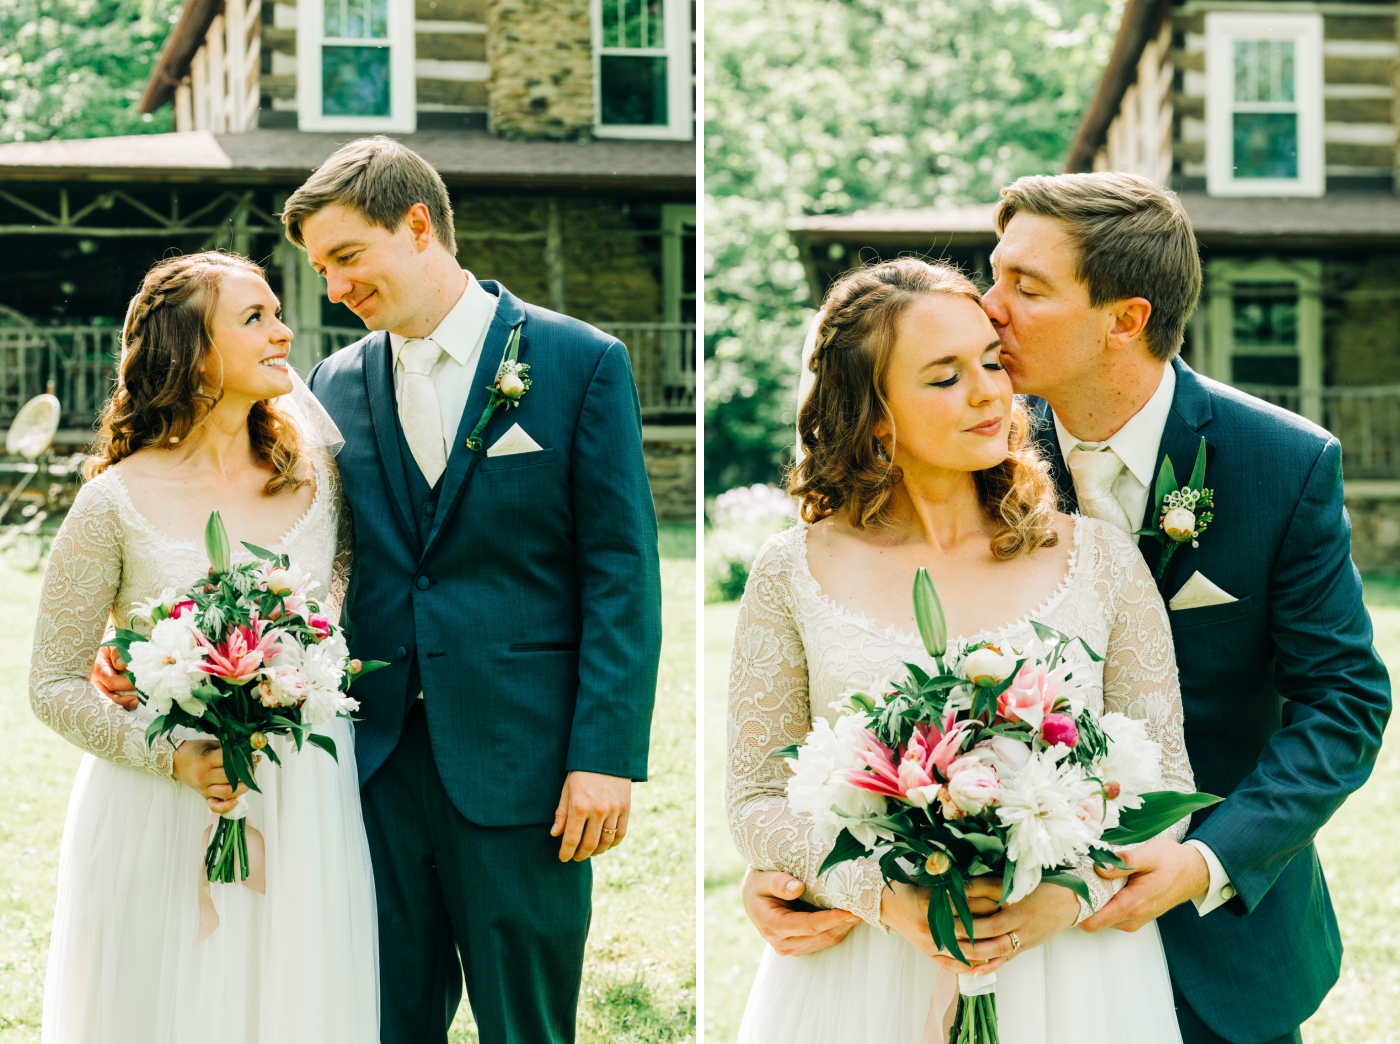 Bride and groom portraits at The Old Barn at Brown County